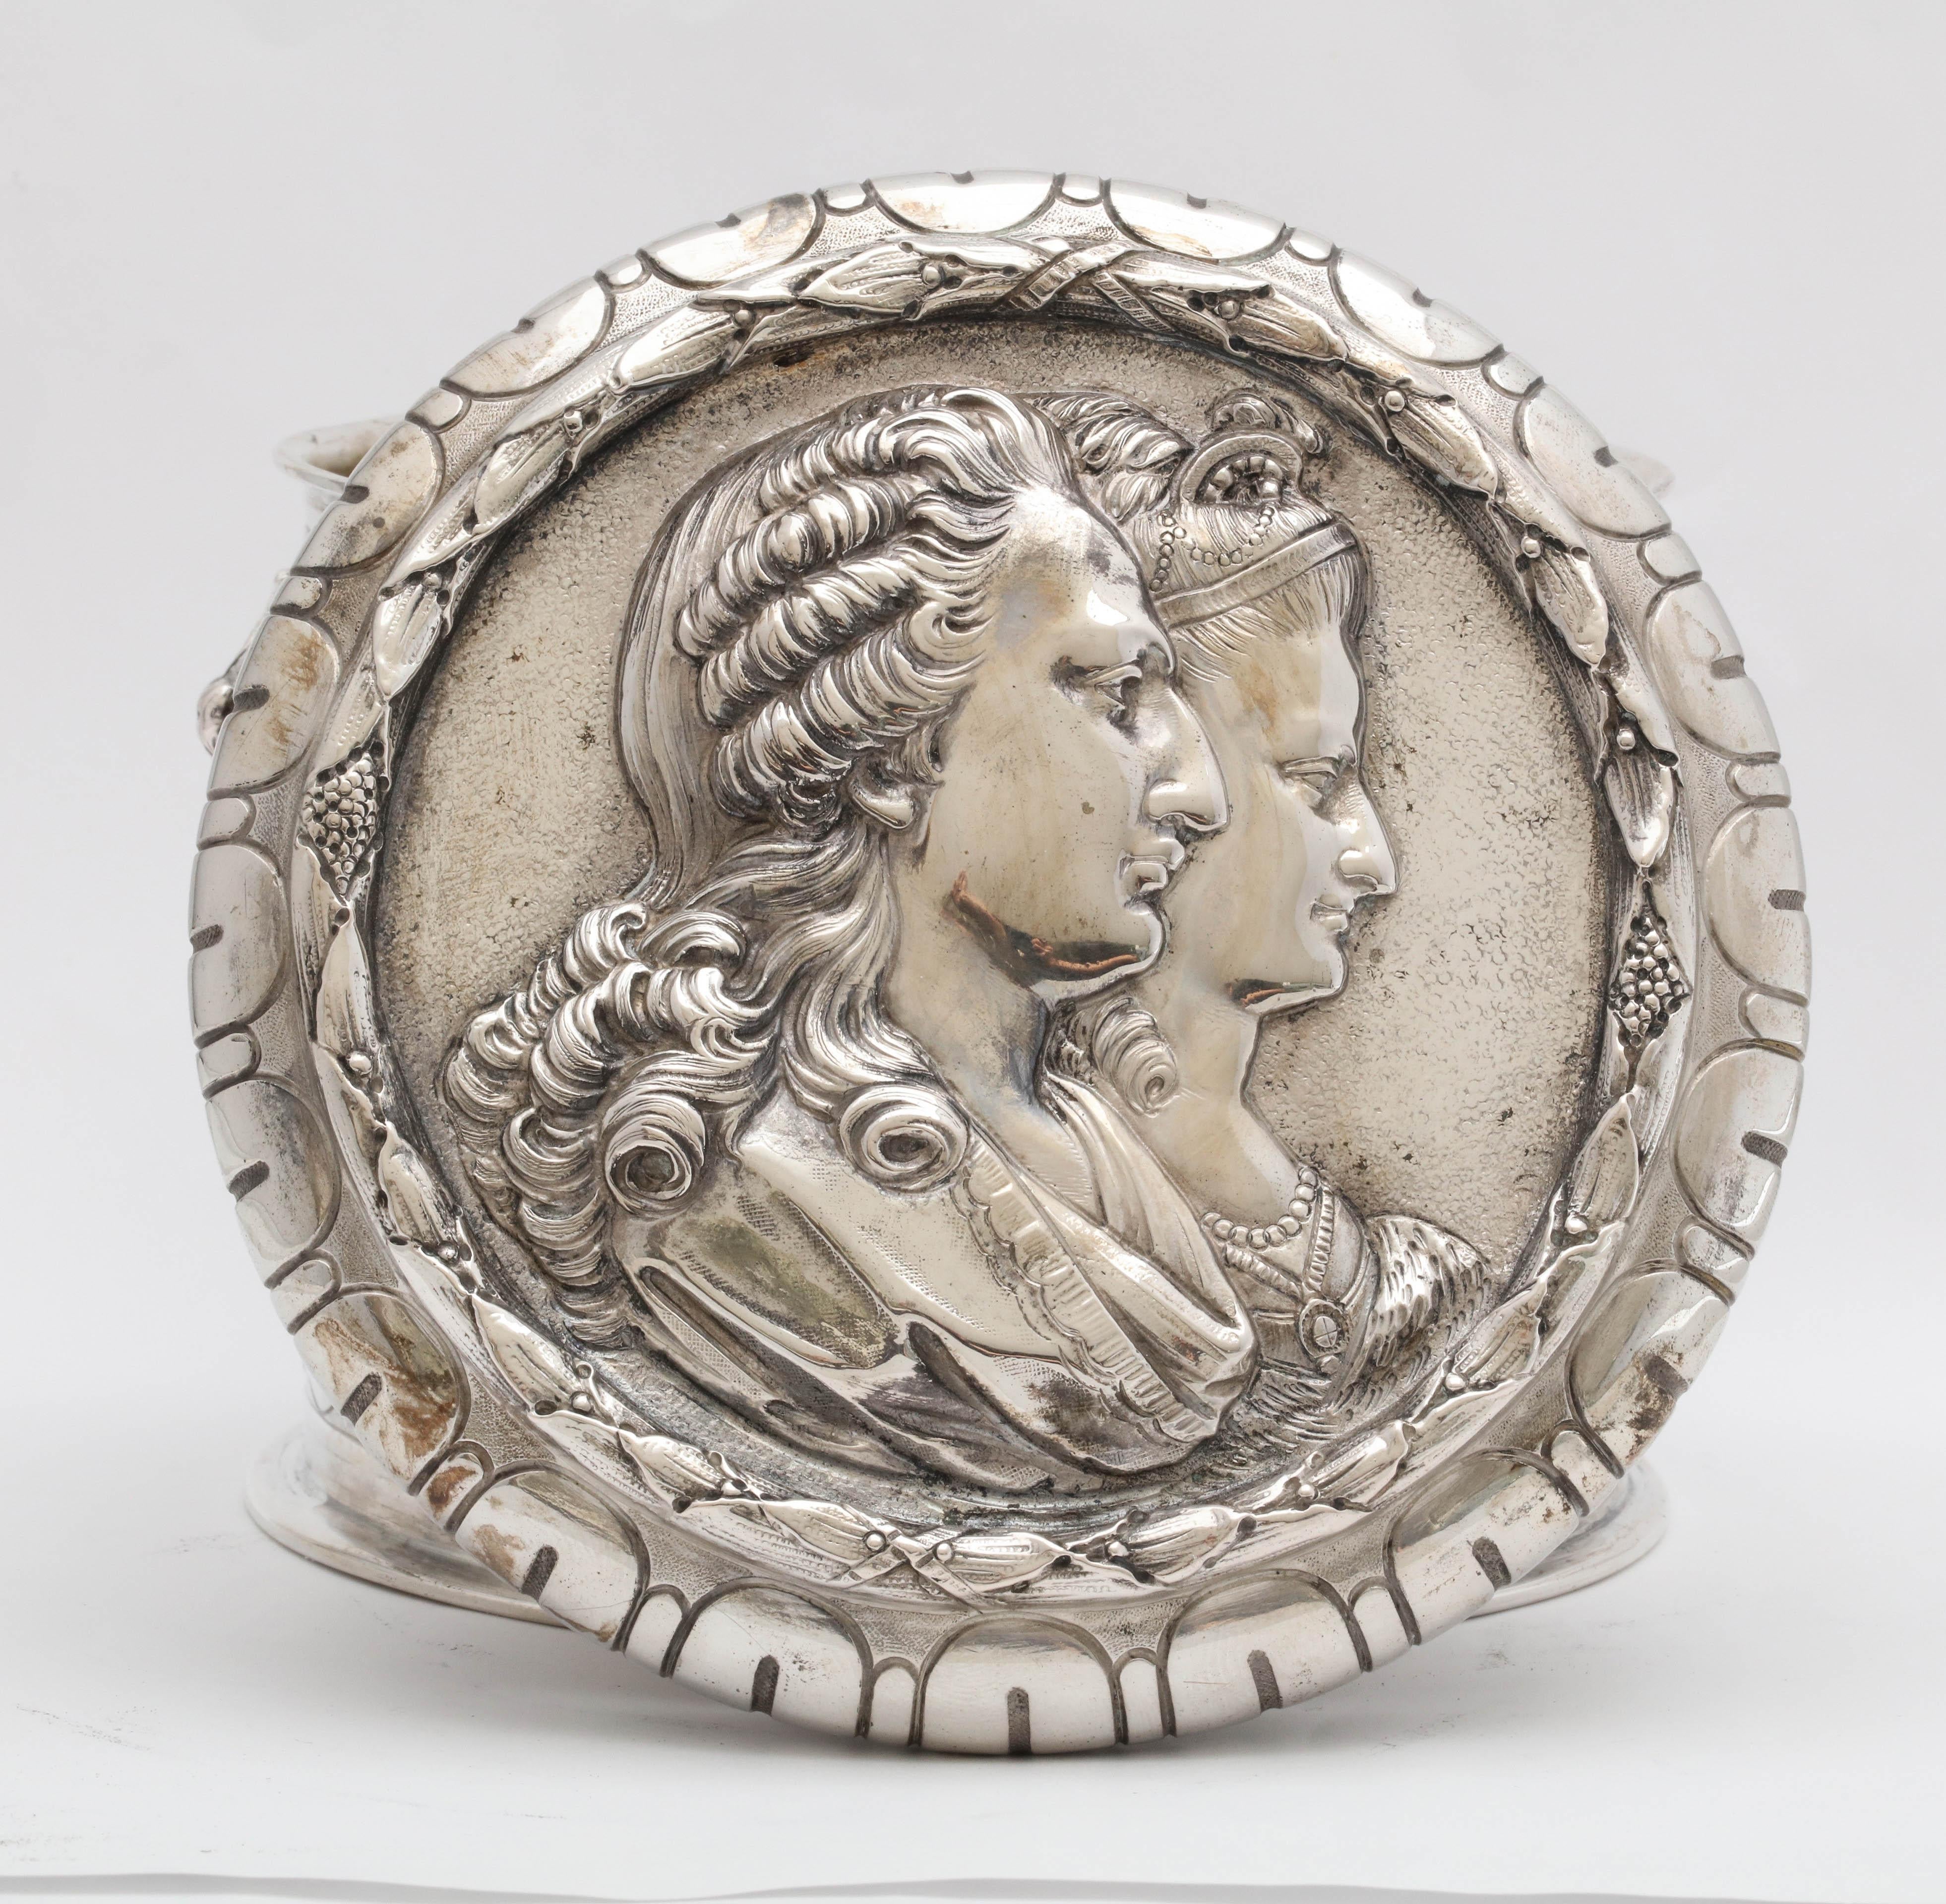 Neoclassical, continental silver (.800) table box, Germany, circa 1895, having Hannau marks.
Chased laurel swags are suspended from ram's heads. Cover is embossed with what looks to be a royal couple. Interior is gilded. Measures 4 1/2 inches high